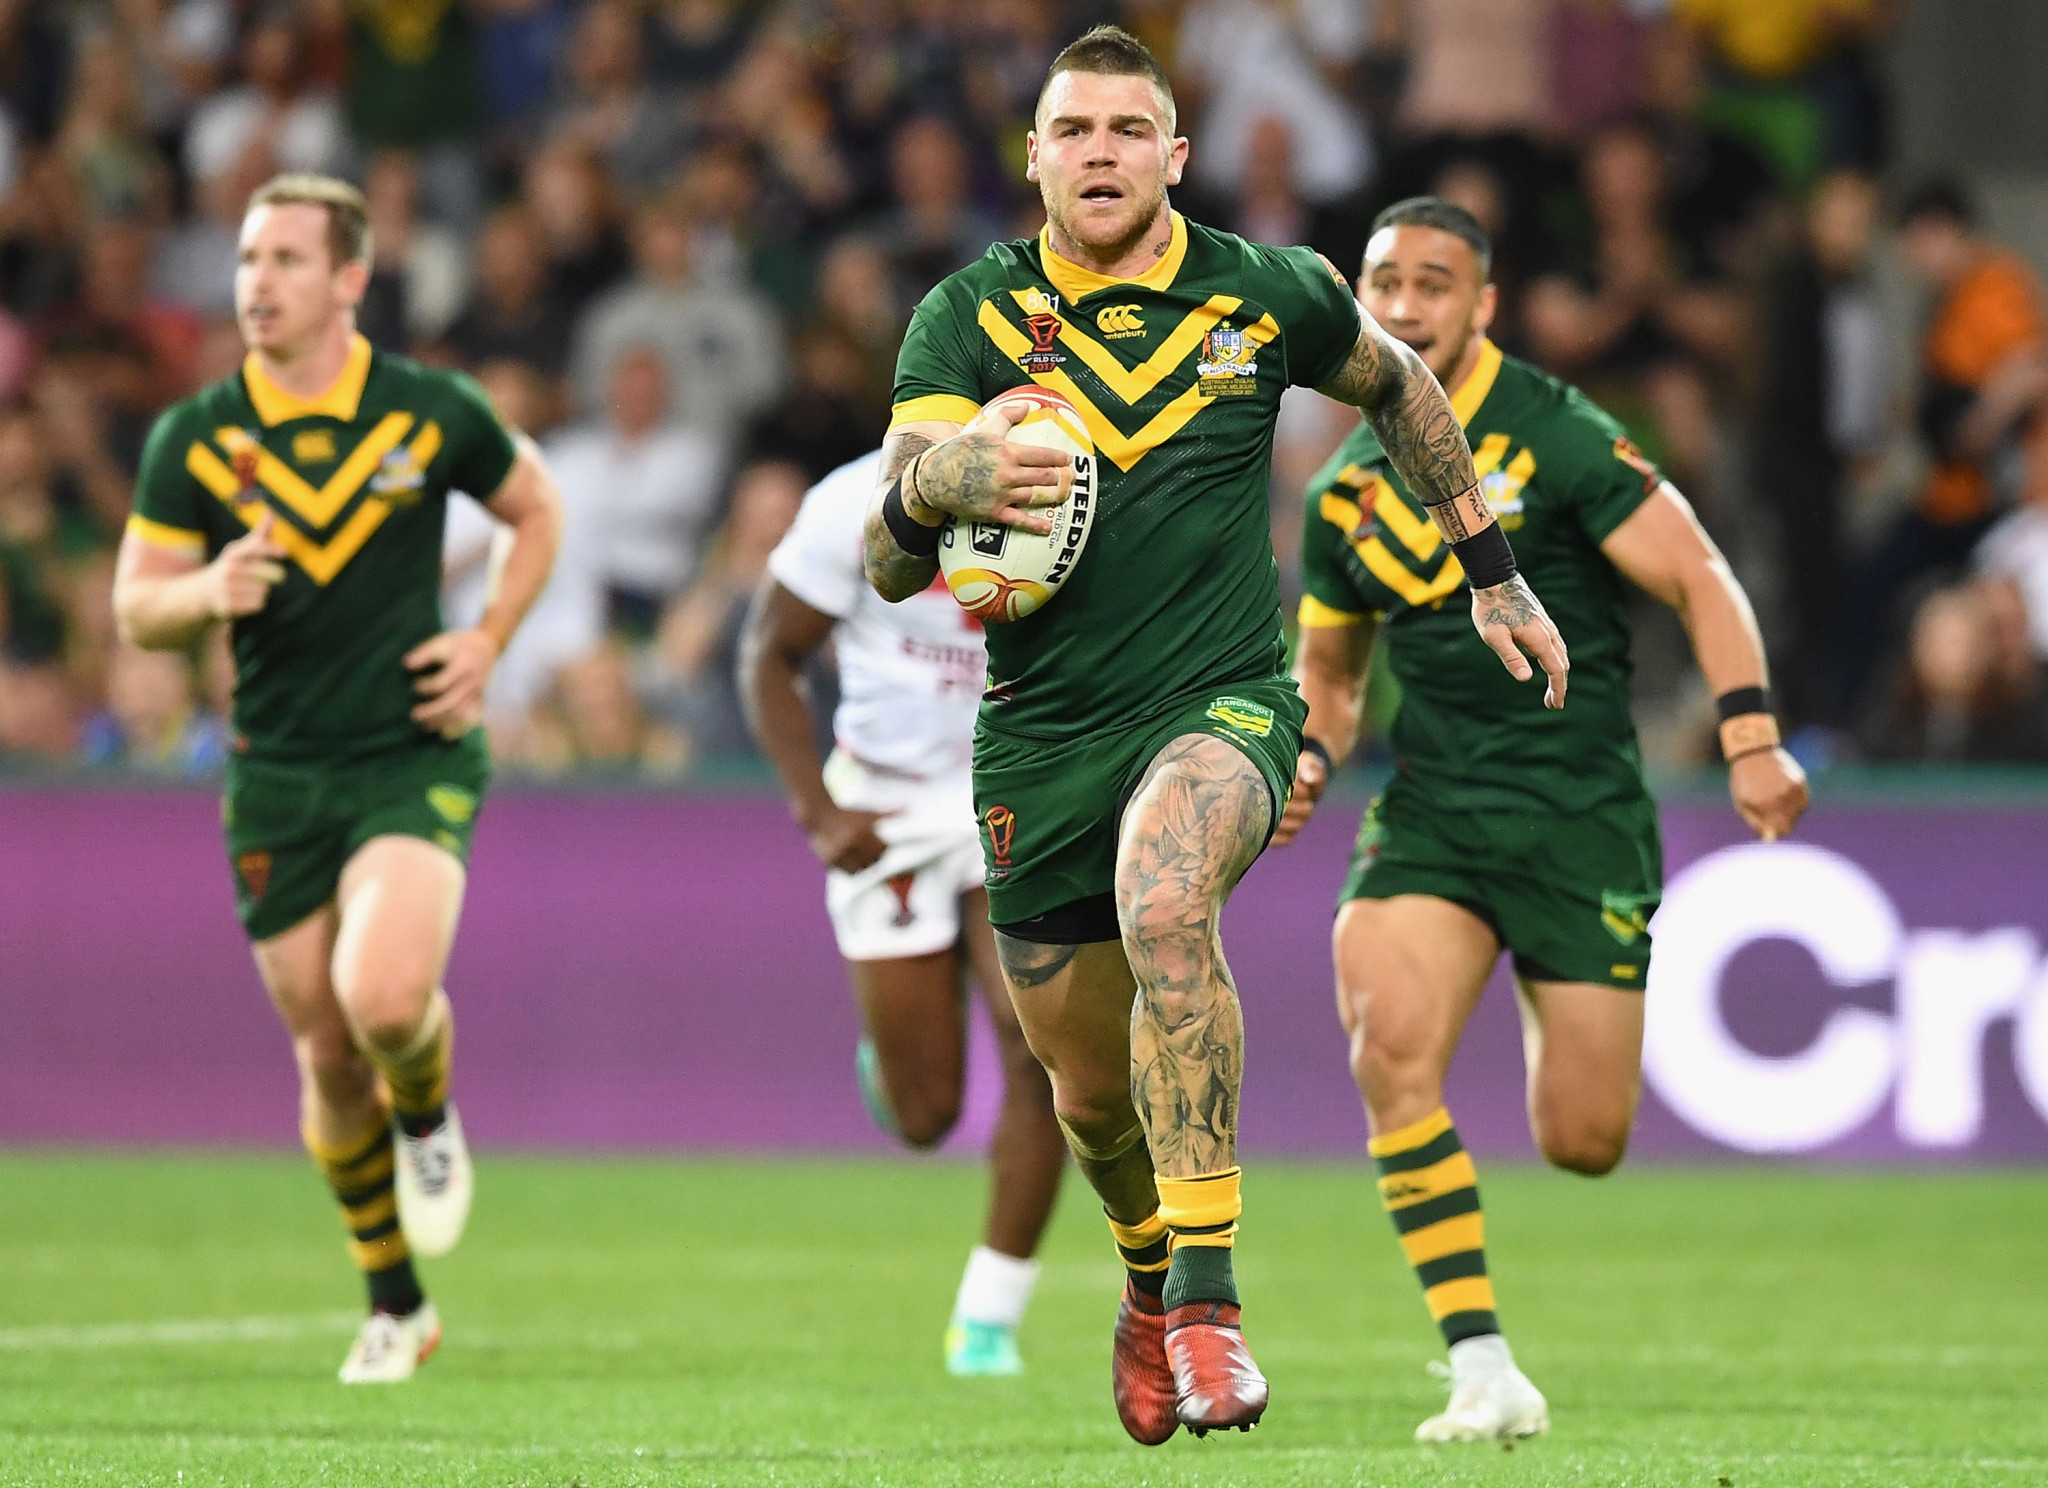 Josh Dugan scored a last-minute try to seal victory ©Getty Images